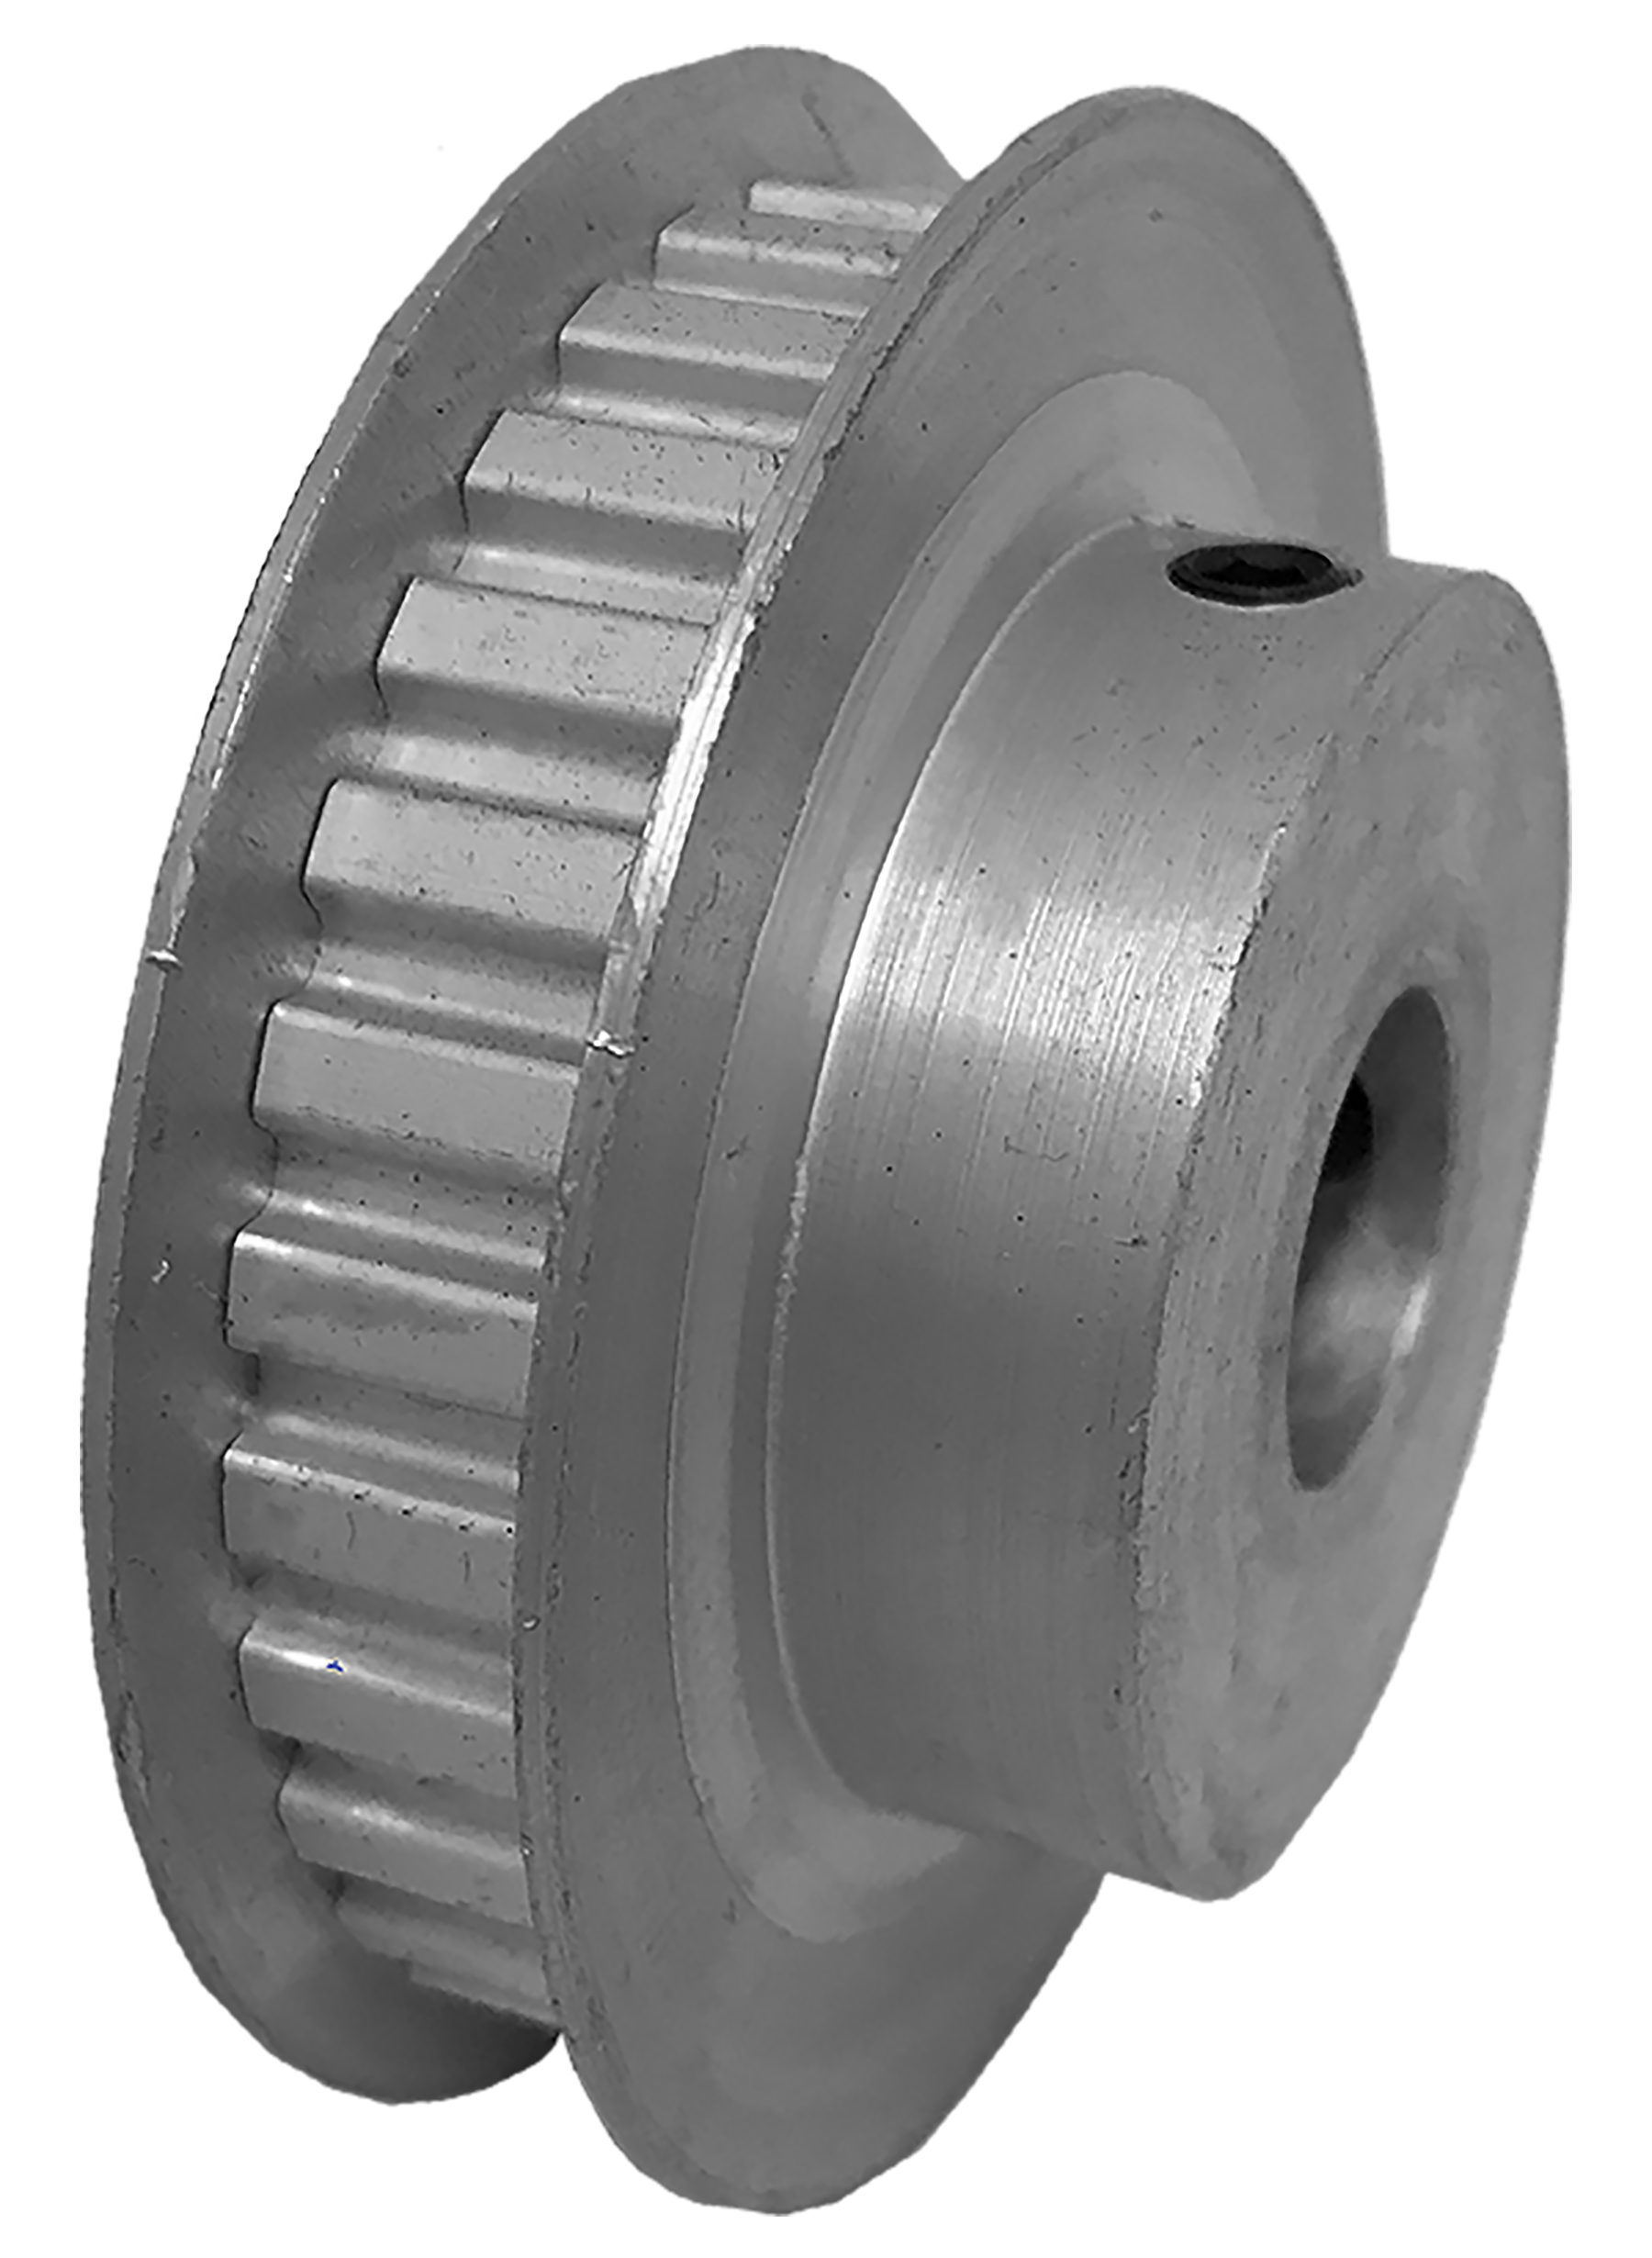 30XL025-6FA6 - Aluminum Imperial Pitch Pulleys